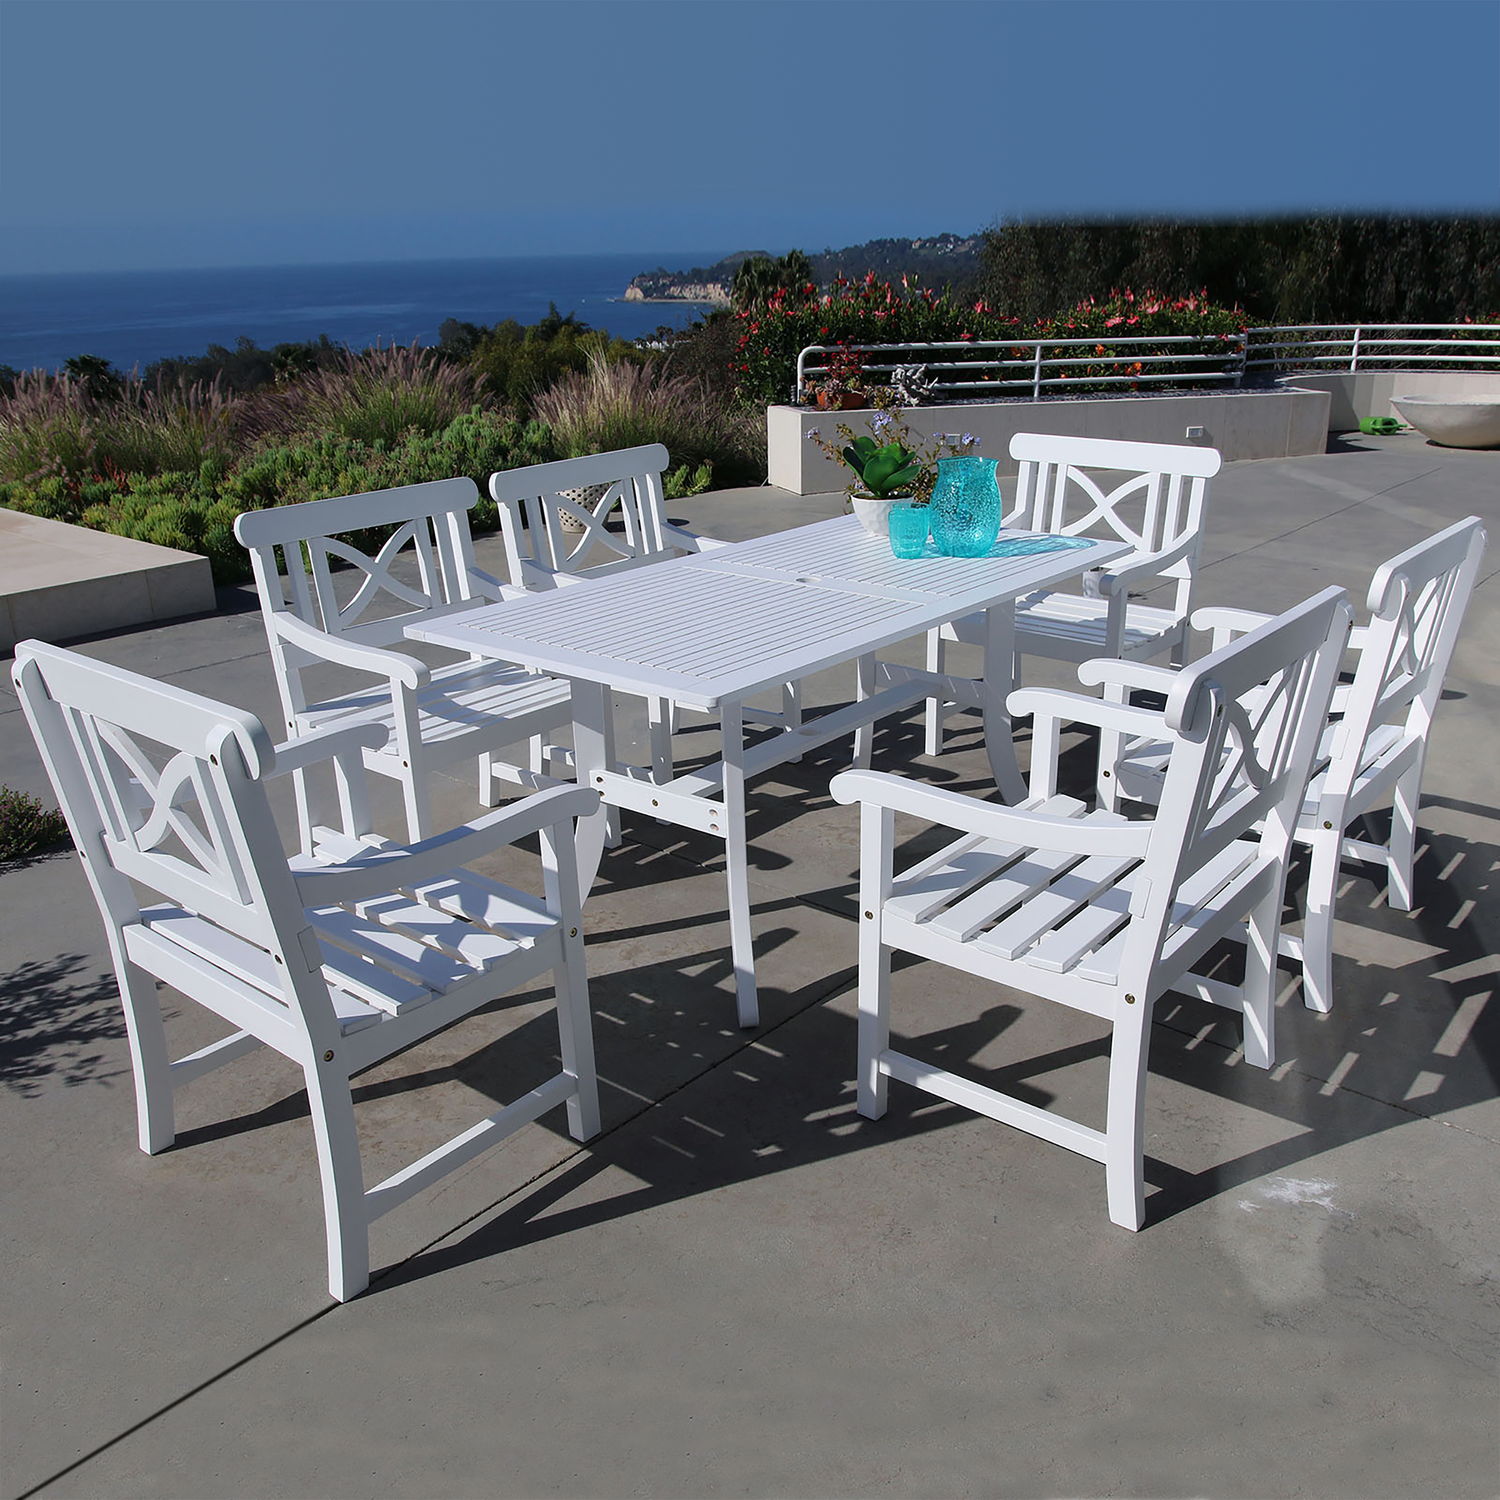 Bradley Outdoor 7-piece Wood Patio Dining Set in White